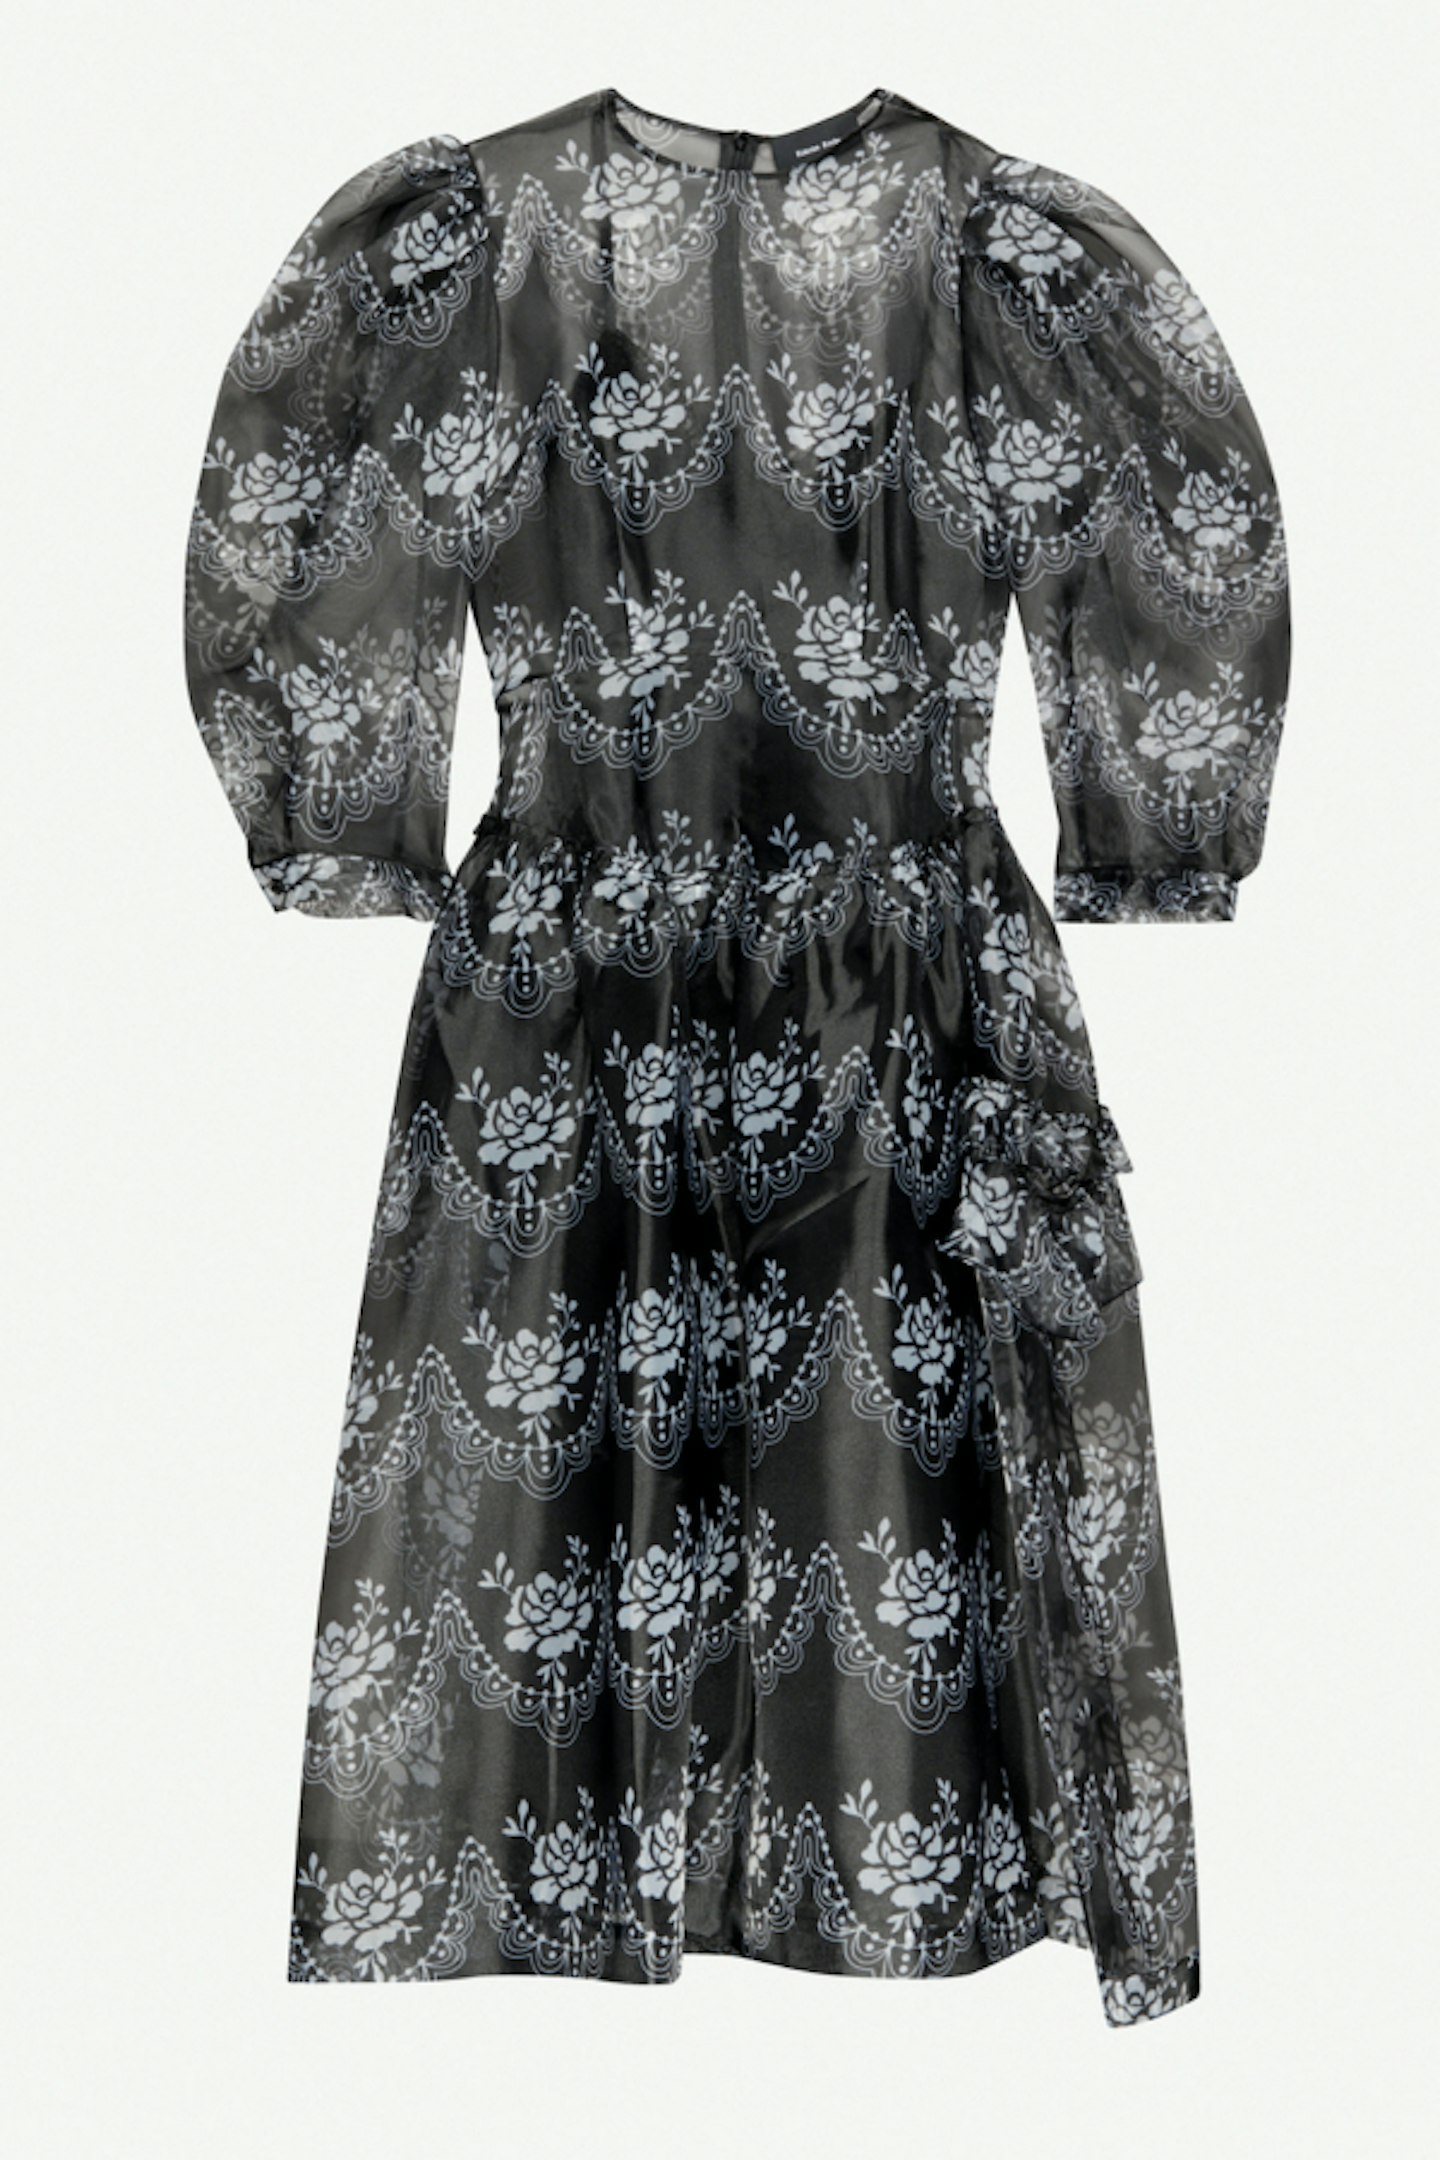 Simone Rocha, Floral Organza Dress, Rent From £88